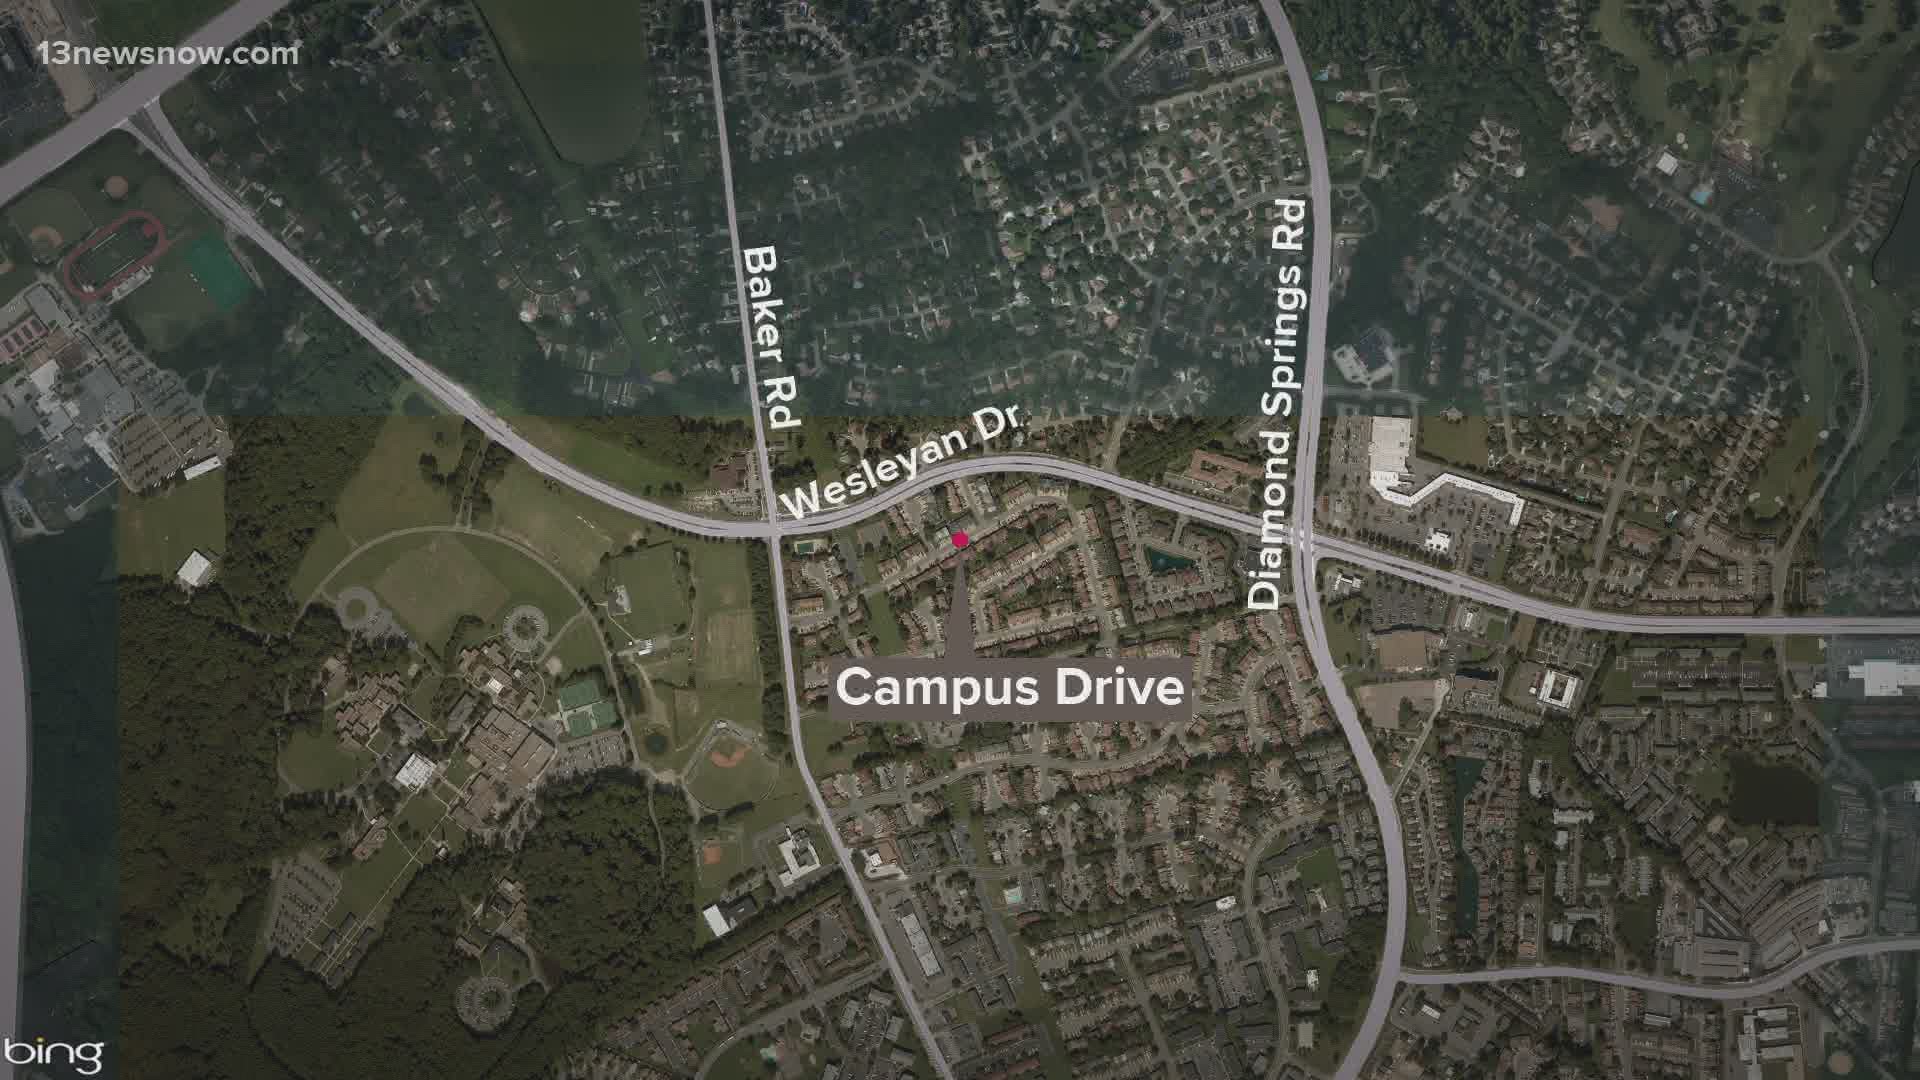 Police say a man was shot on Campus Drive, but his injury wasn't life-threatening. They've detained one person in this case, but haven't identified any suspects.